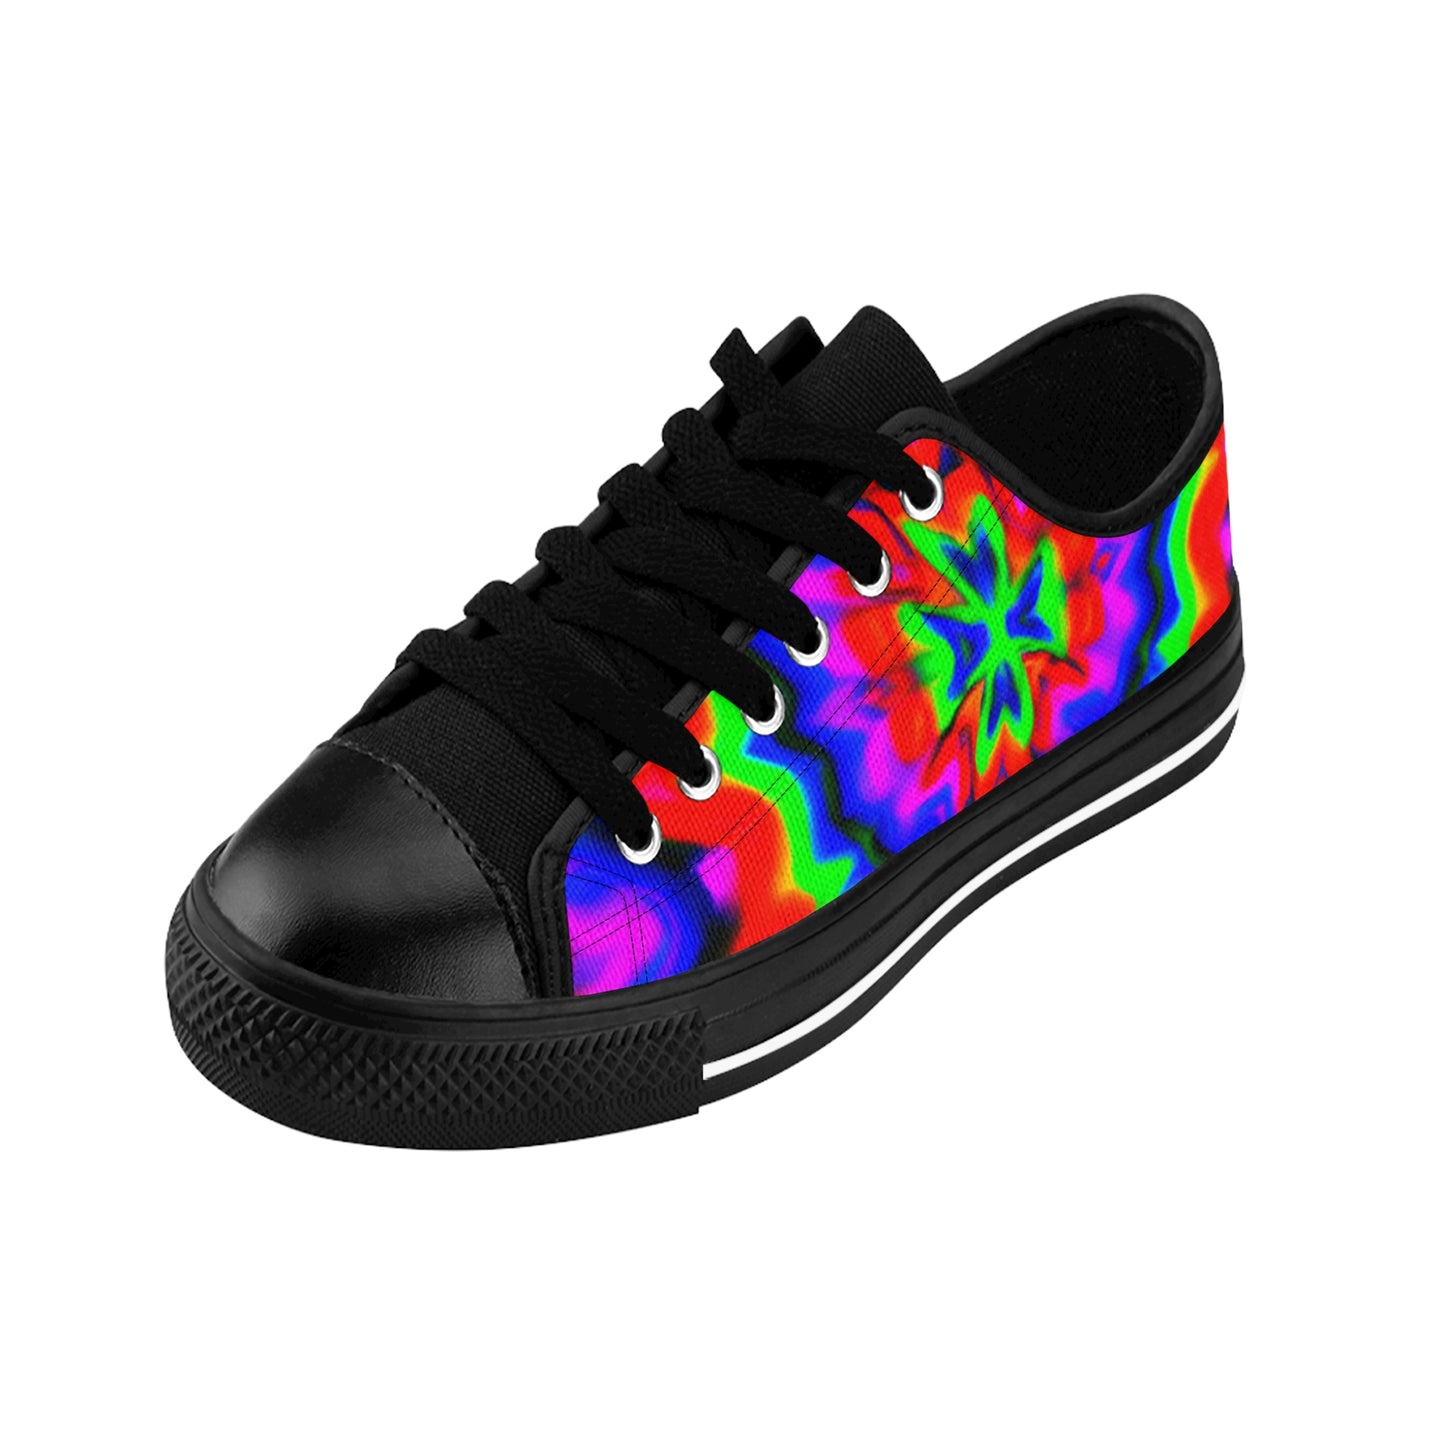 Godric the Shoe Maker - Psychedelic Low Top